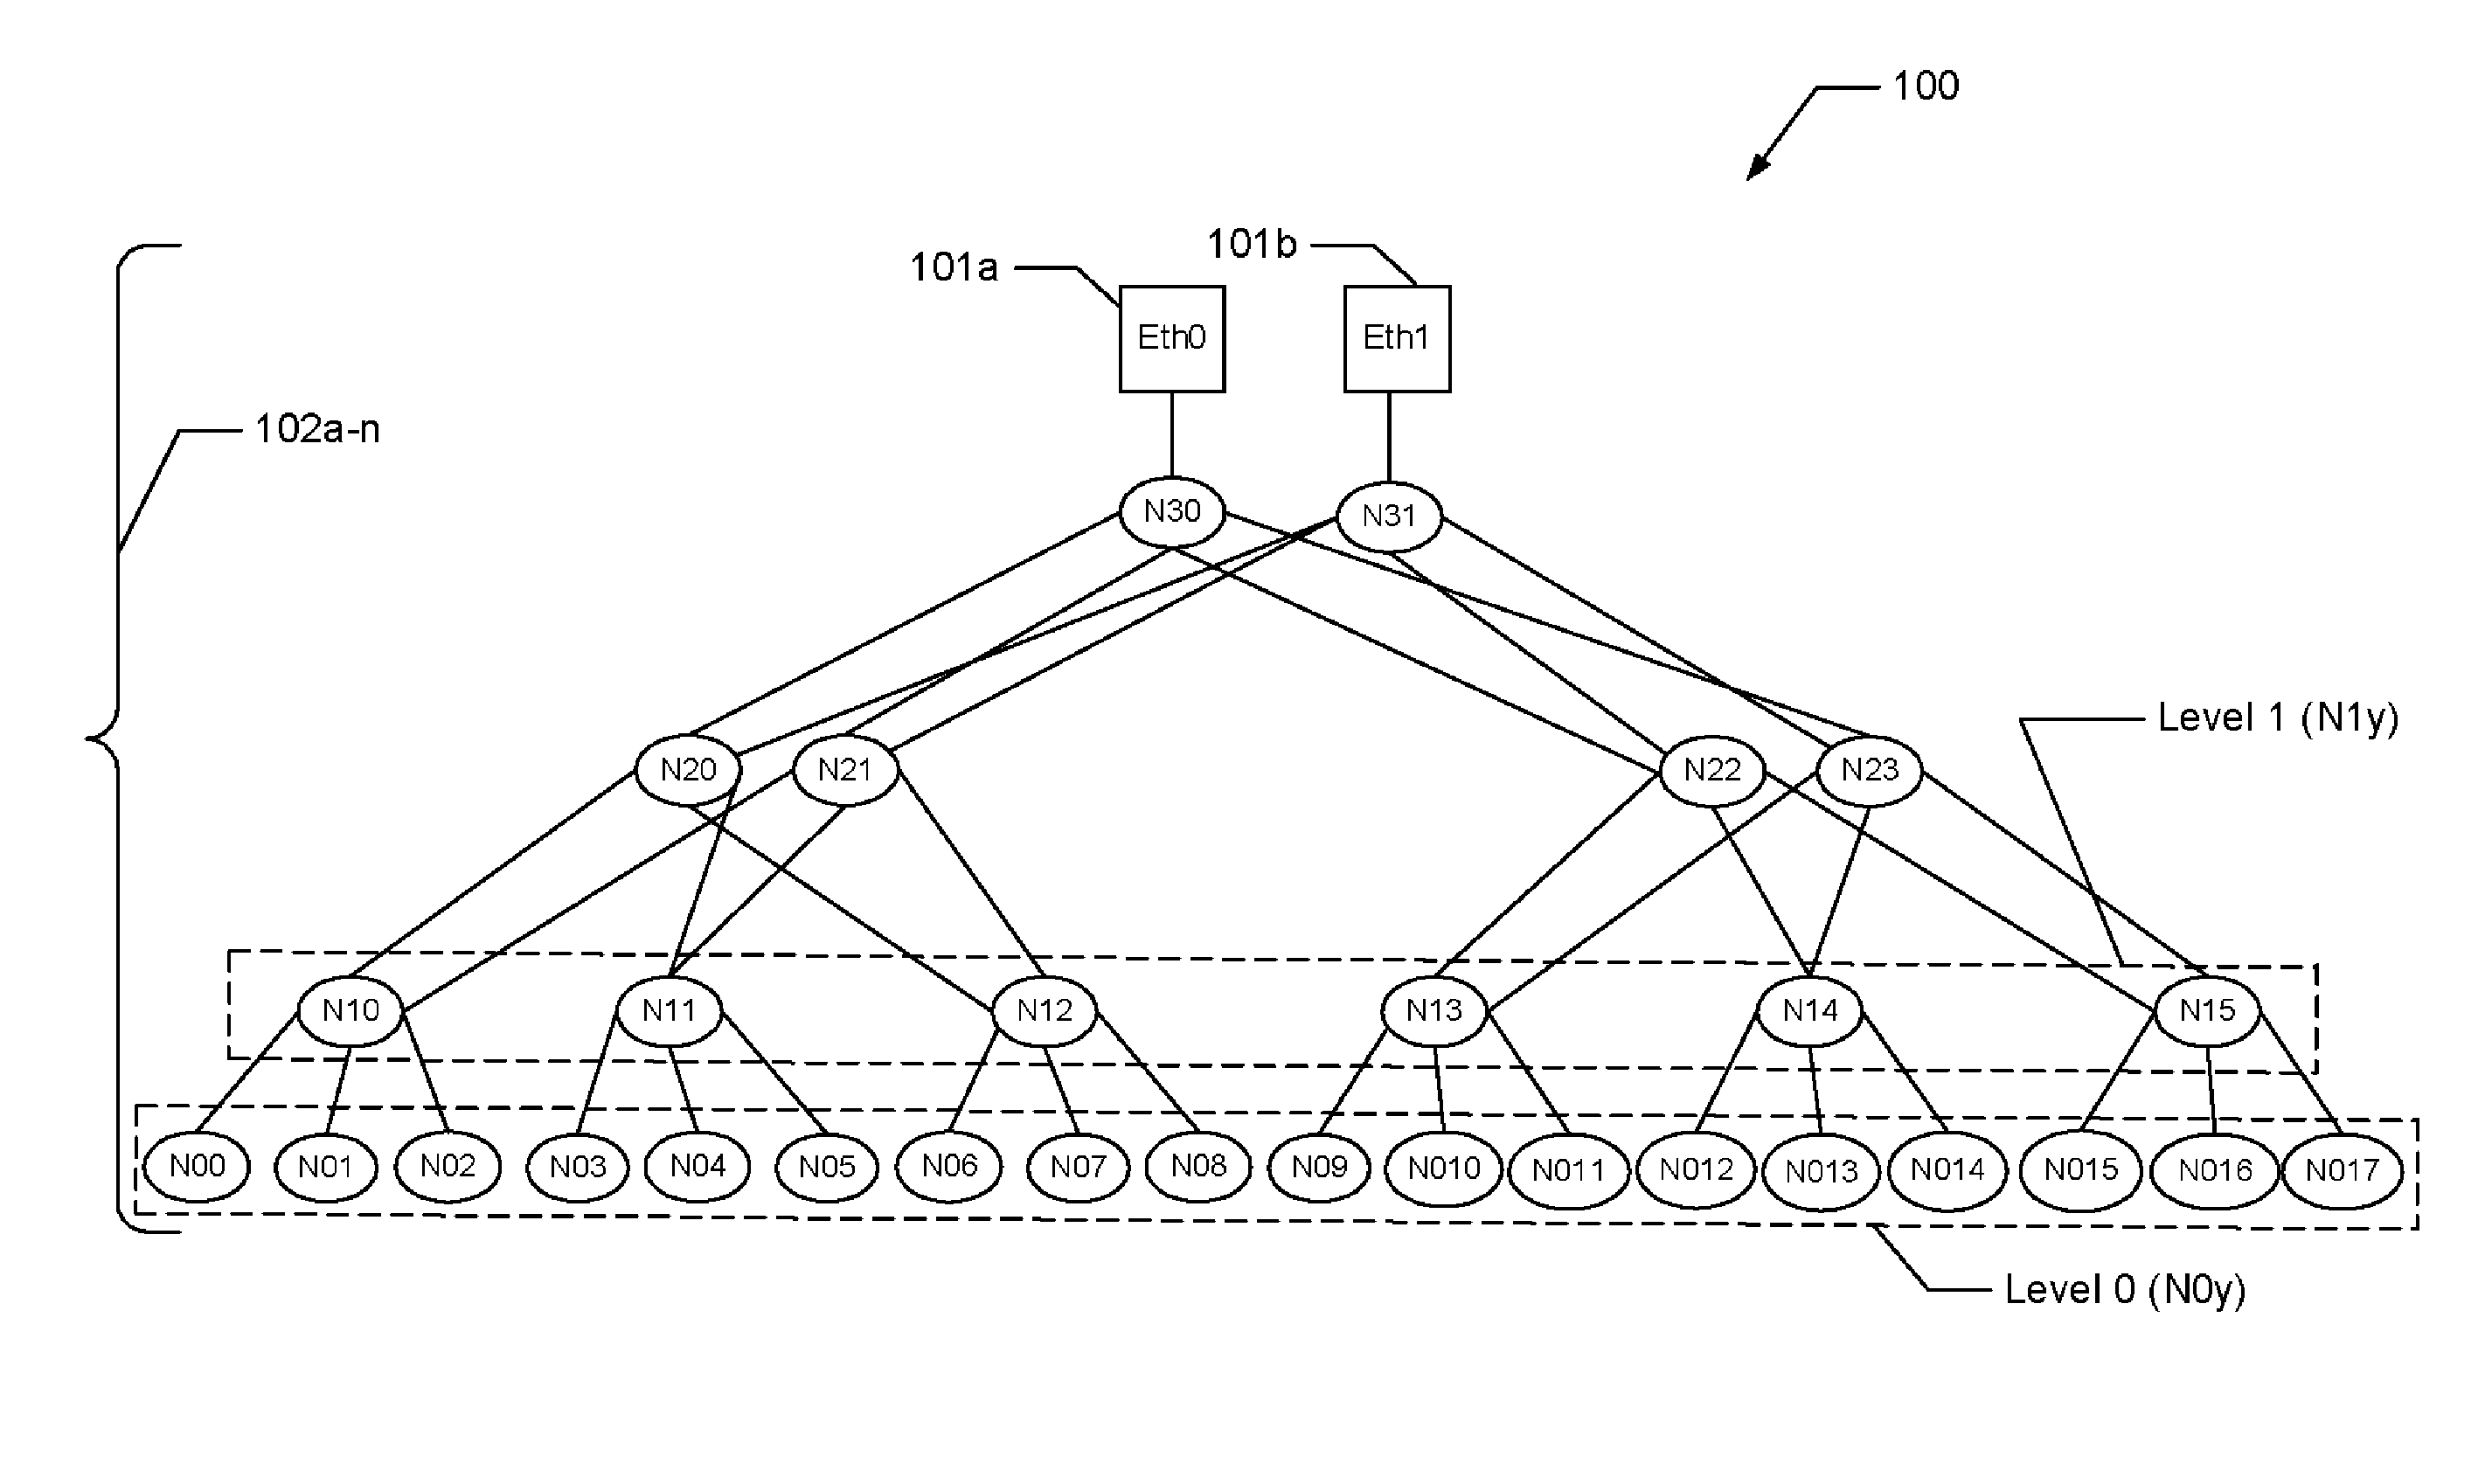 System and Method for Using a Multi-Protocol Fabric Module Across a Distributed Server Interconnect Fabric